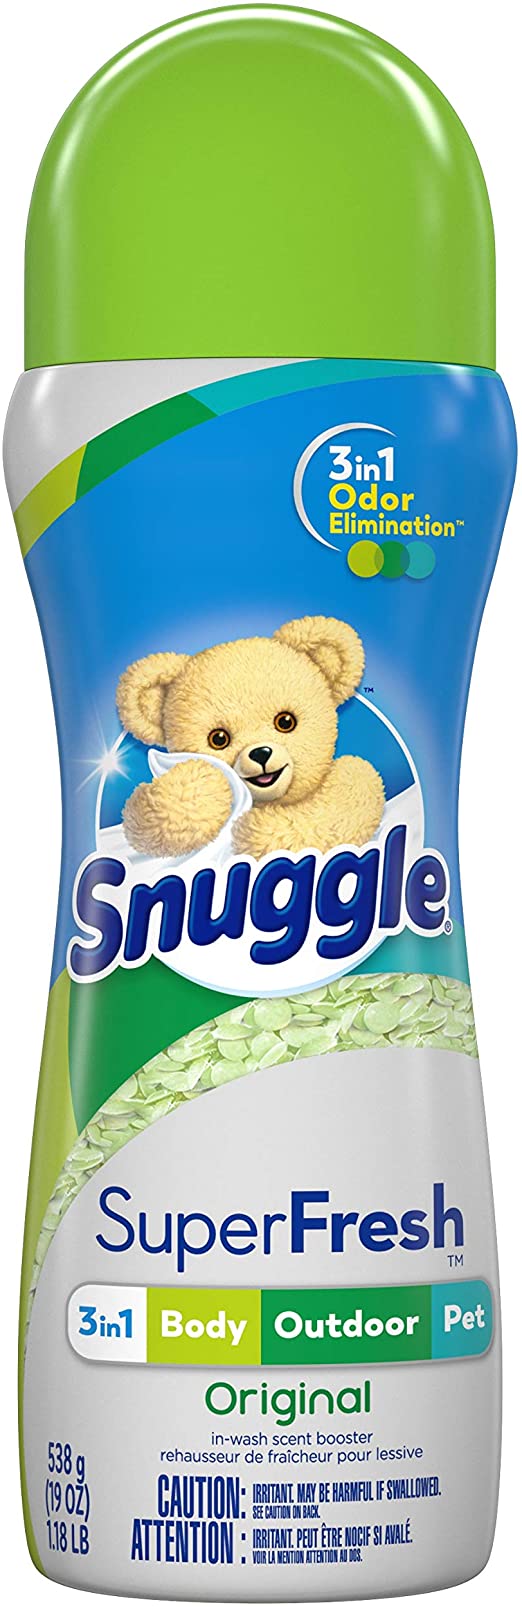 19-Oz Snuggle SuperFresh In-Wash Scent Booster Laundry Beads (Original) $6.30 + free shipping w/ Prime or on $25+